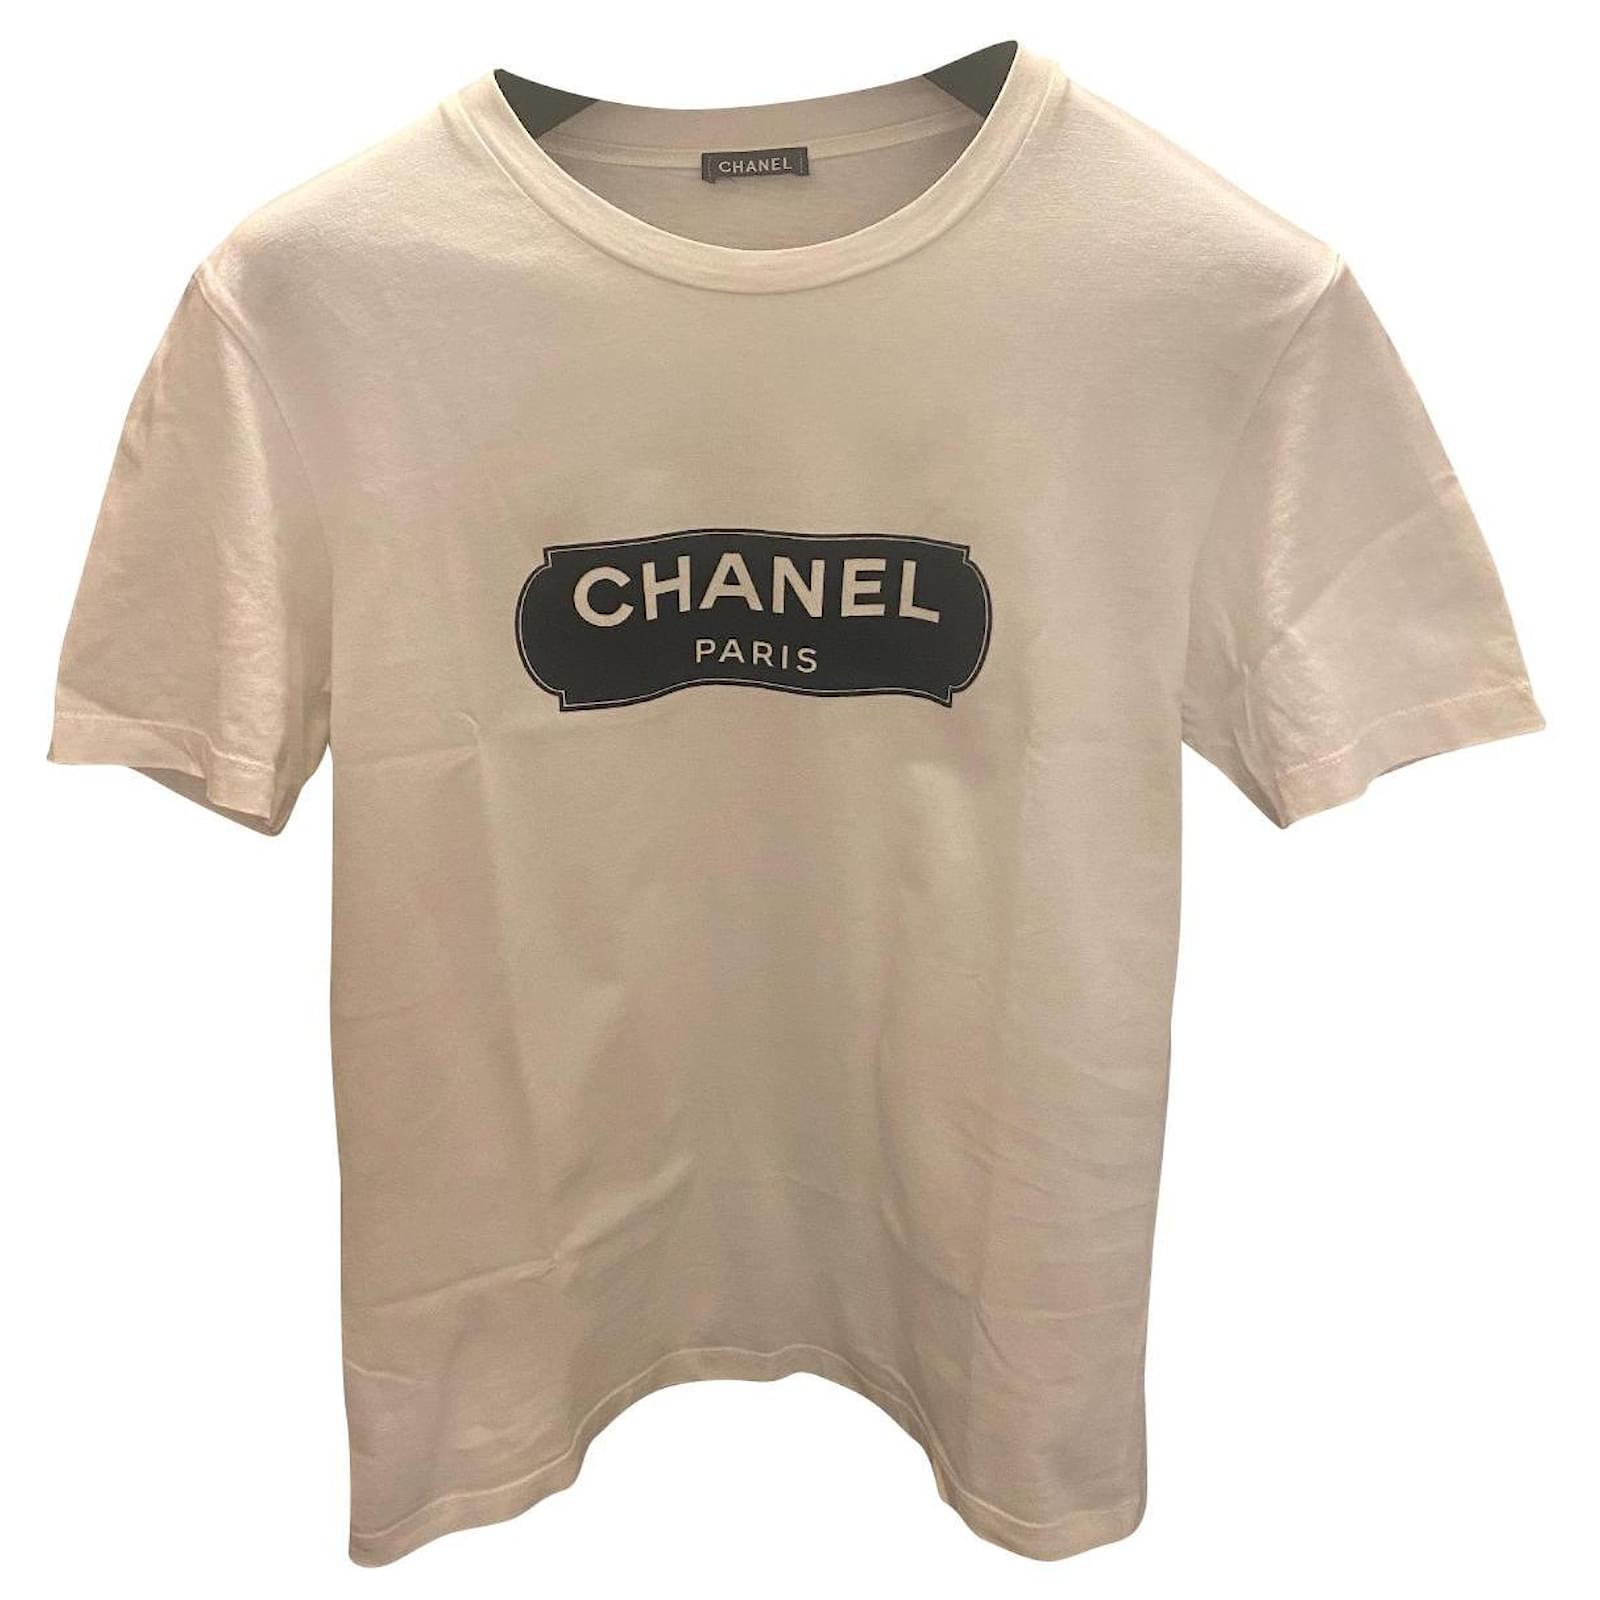 chanel t shirt price-4500 - Hlaing online shopping